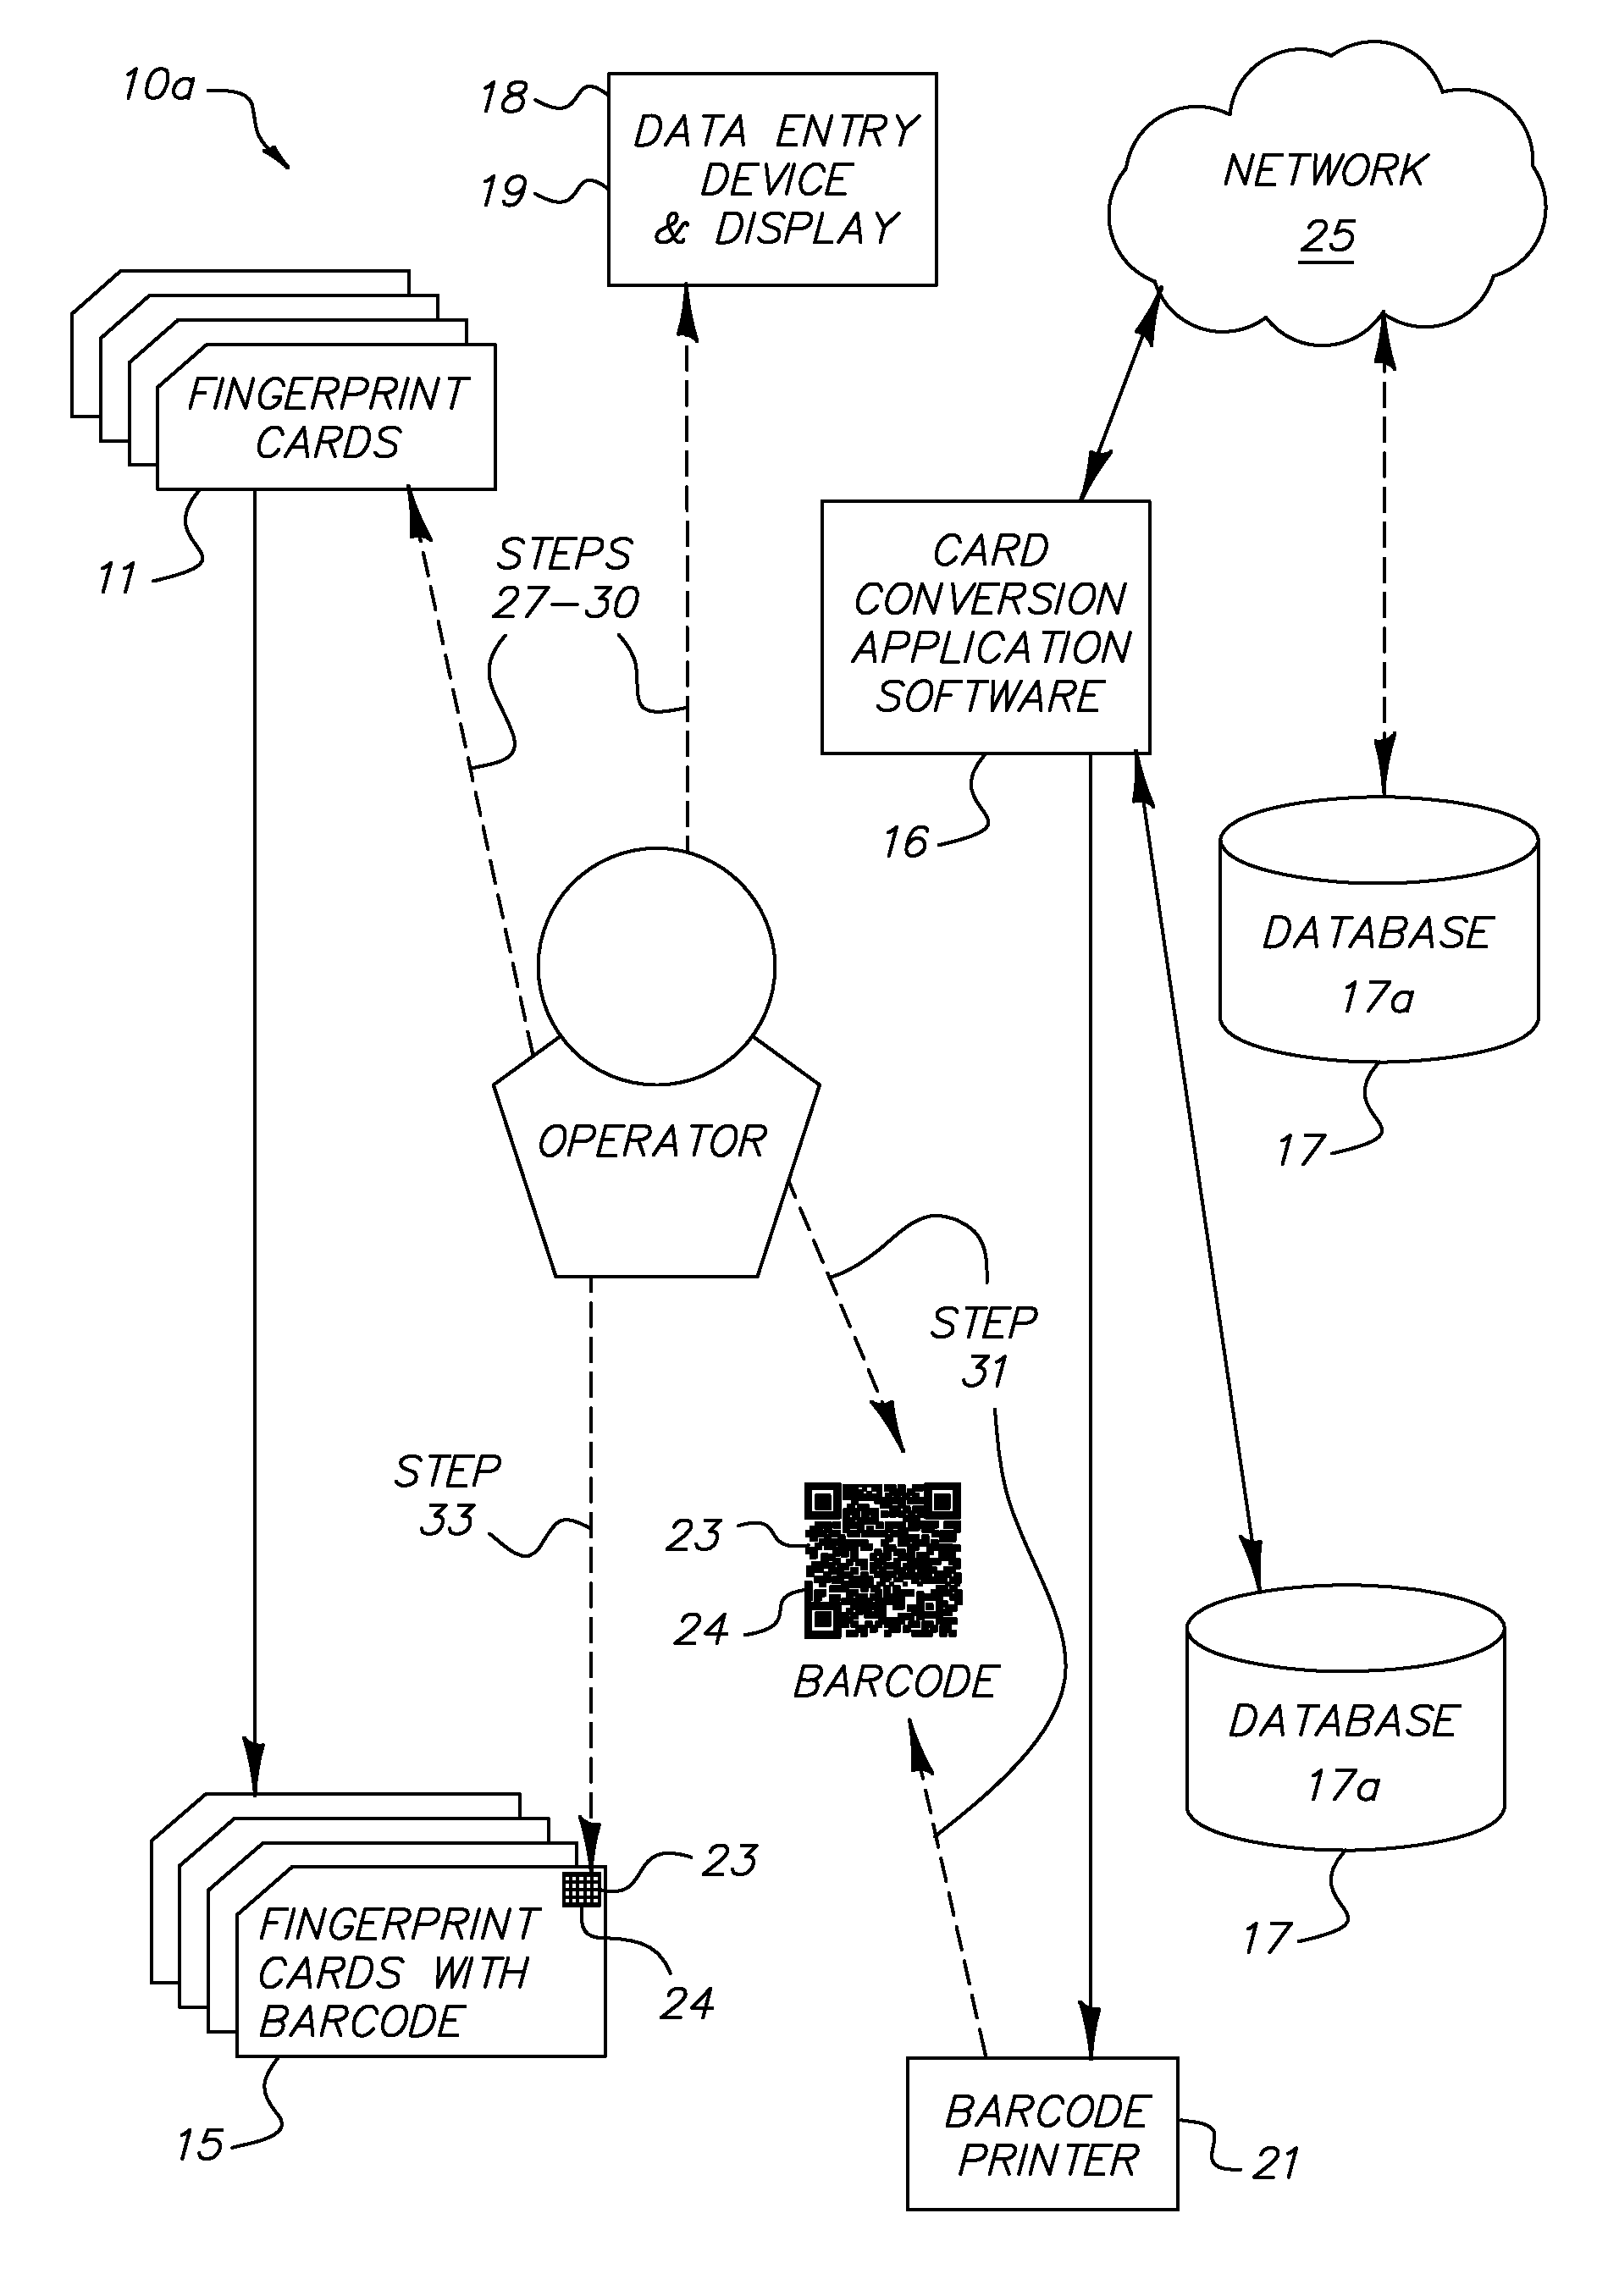 System and method for conversion of fingerprint cards into digital format using machine readable code